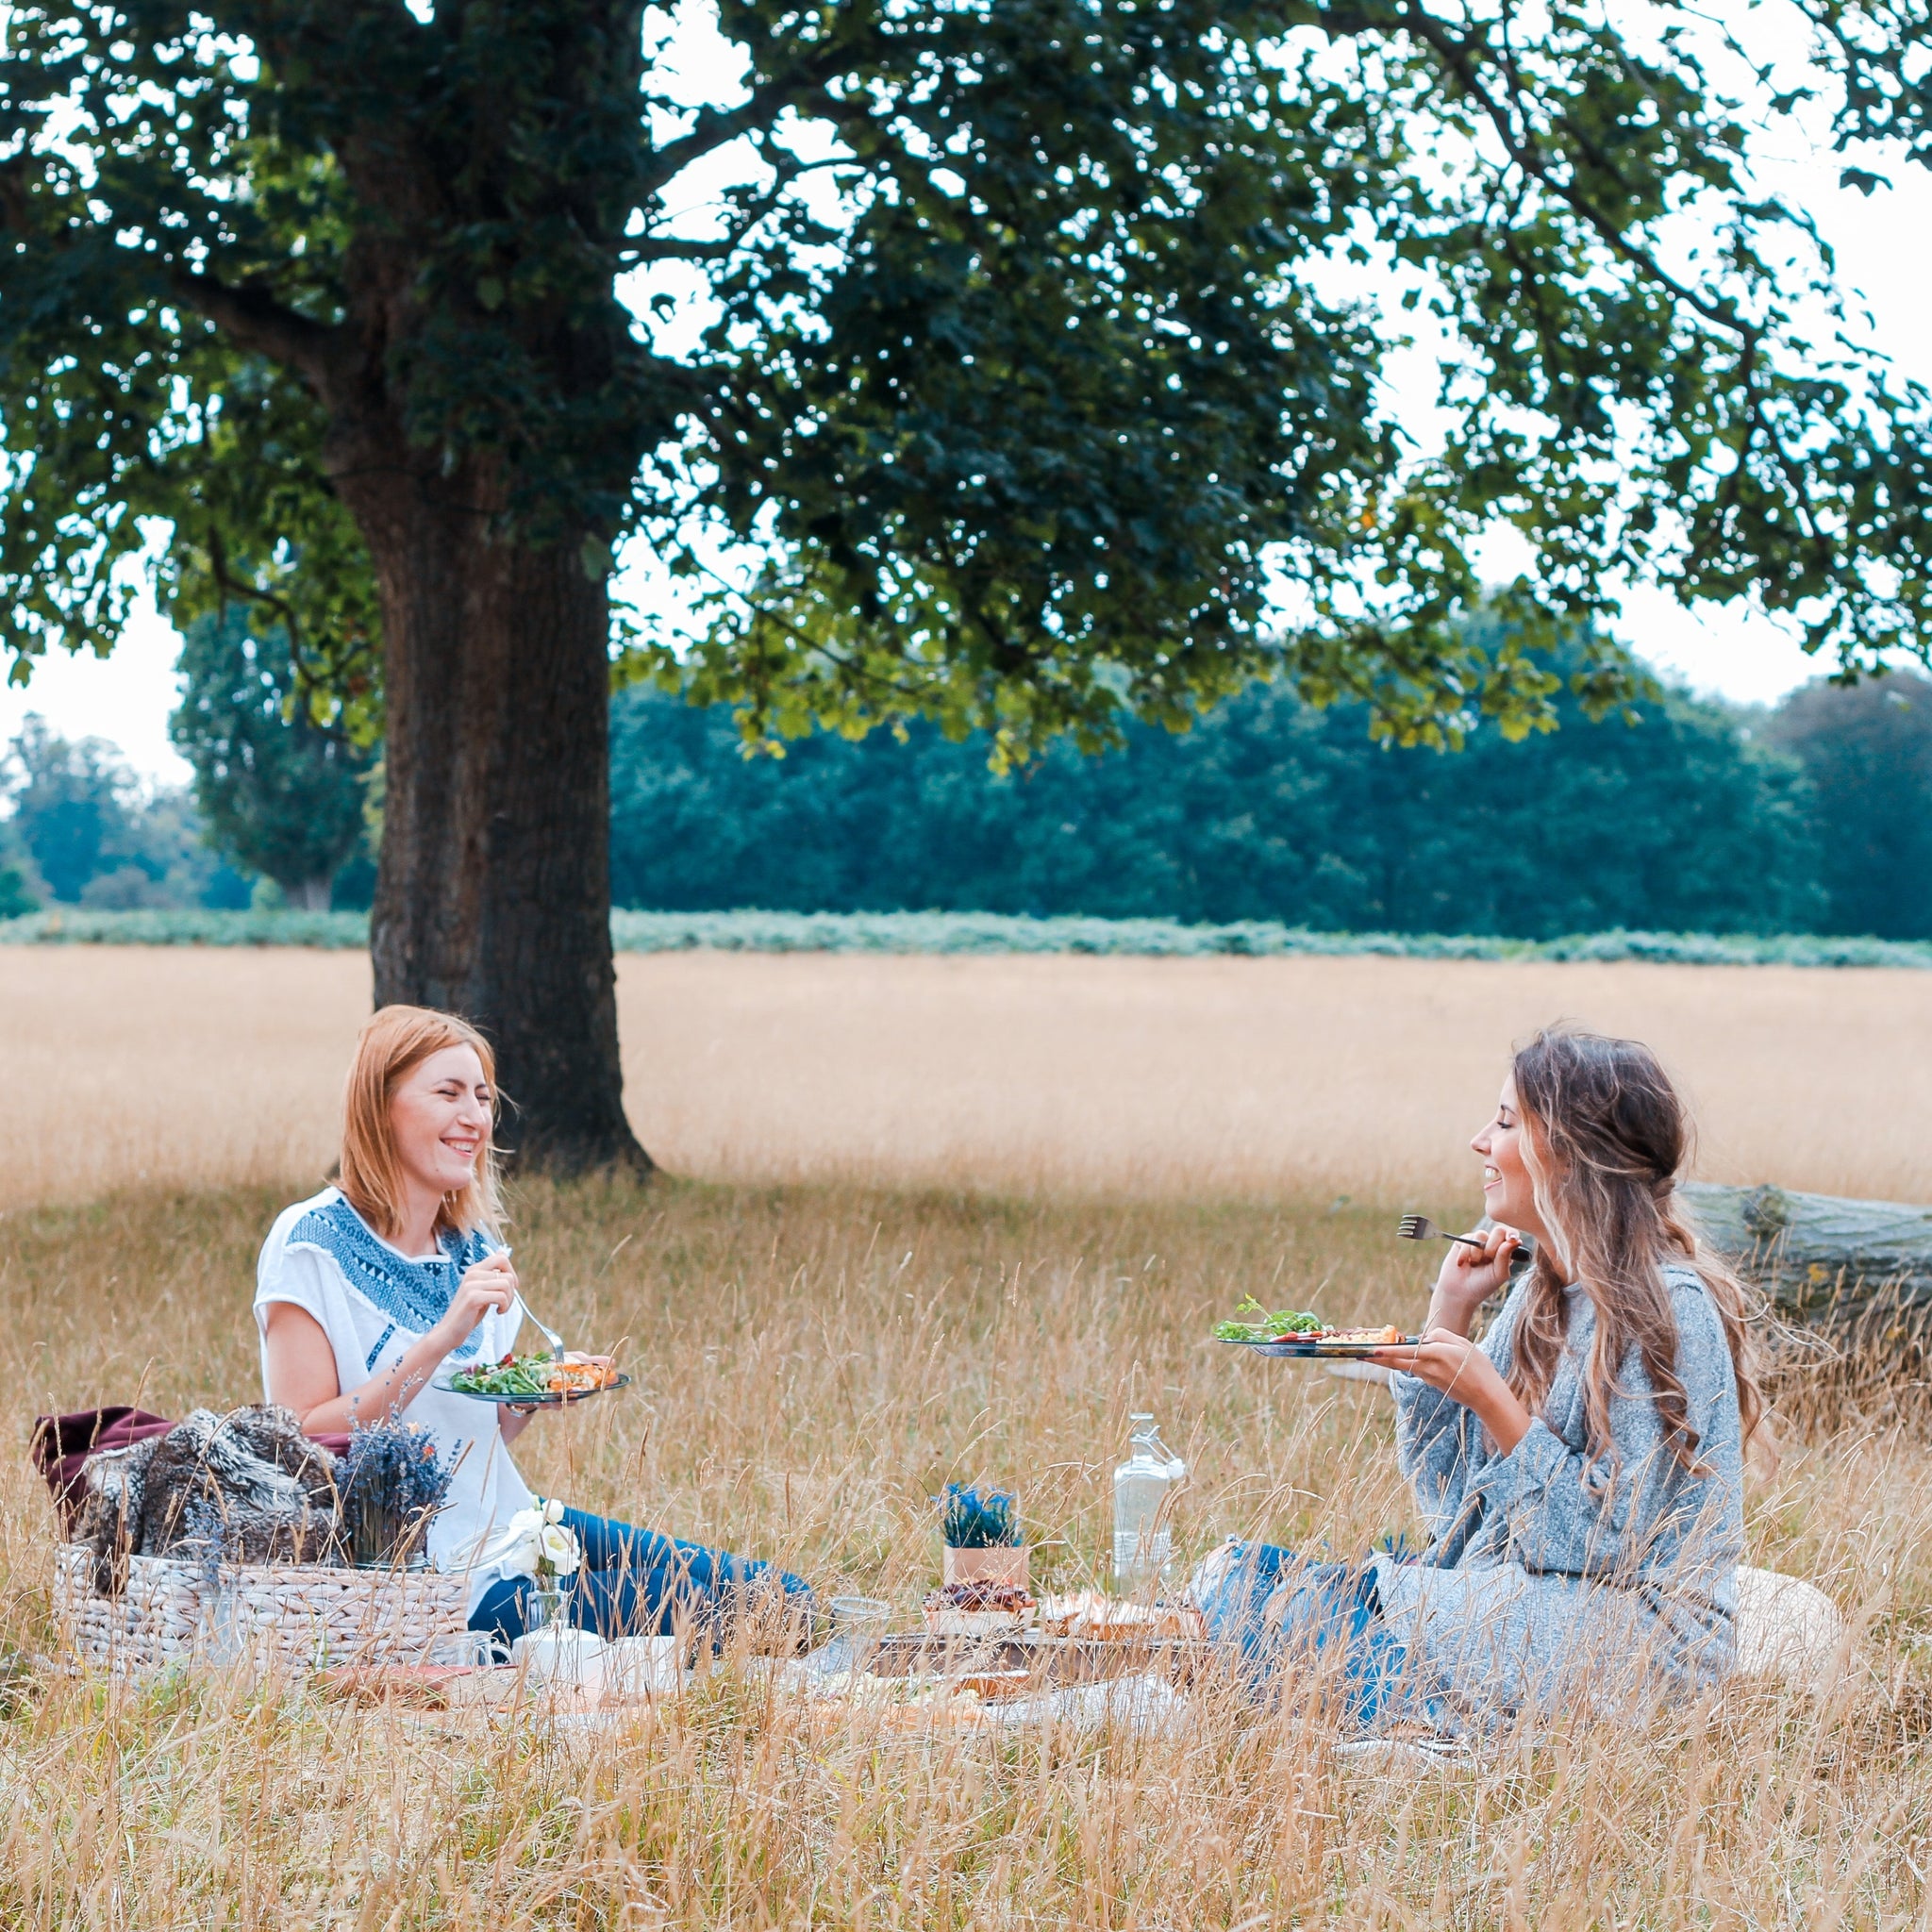 Two friends having a picnic in a field under a tree